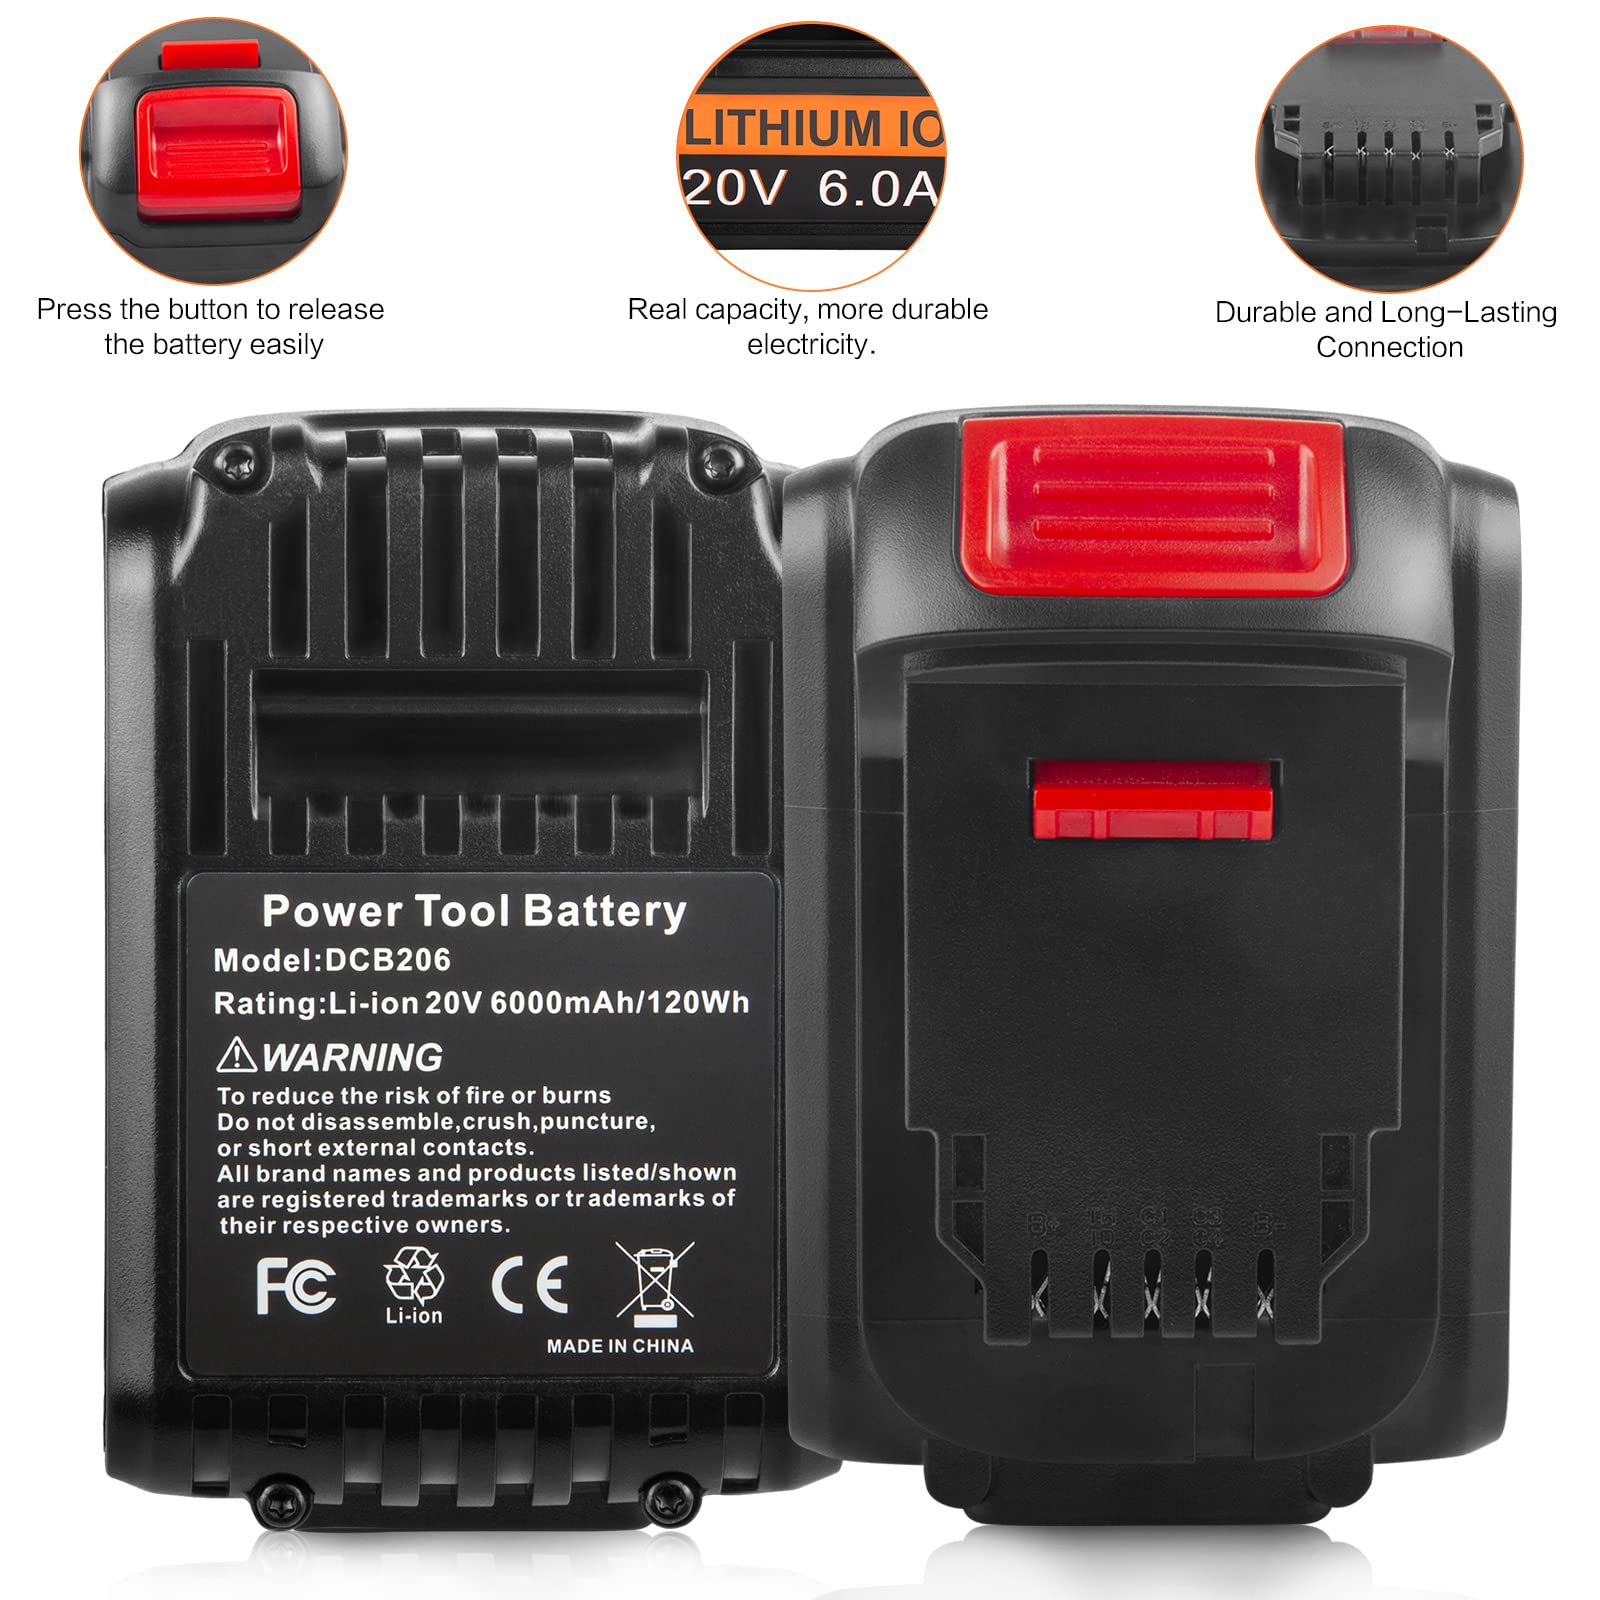 DCB206 20V 6000mAh Lithium Battery Replacement for DeWalt 20V MAX DCB204 DCB200 DCB206 DCB205-2 DCB201 DCB203 DCB181 DCB180 20V DCD/DCF/DCG/DCS Series Cordless Power Tools (2 Packs 6000mAh)